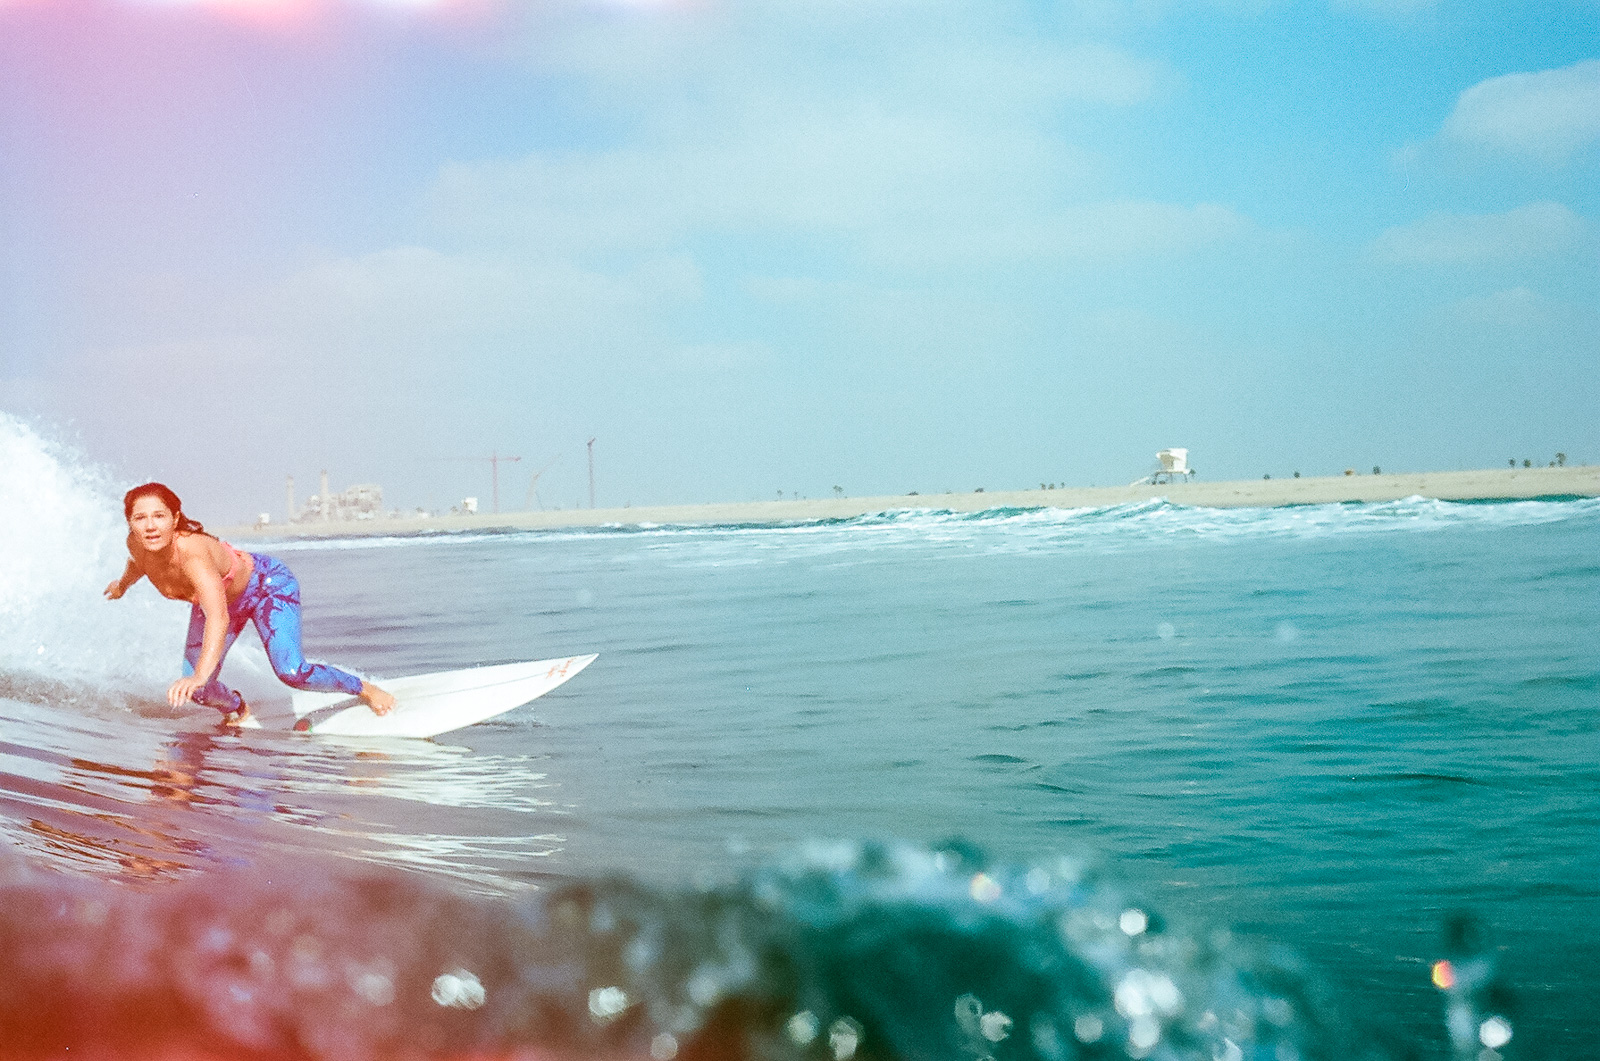 35mm color film Surfing photo shoot in the water at Huntington State Beach with girl surfer surfing  for Get wise fool eco-friendly surf company